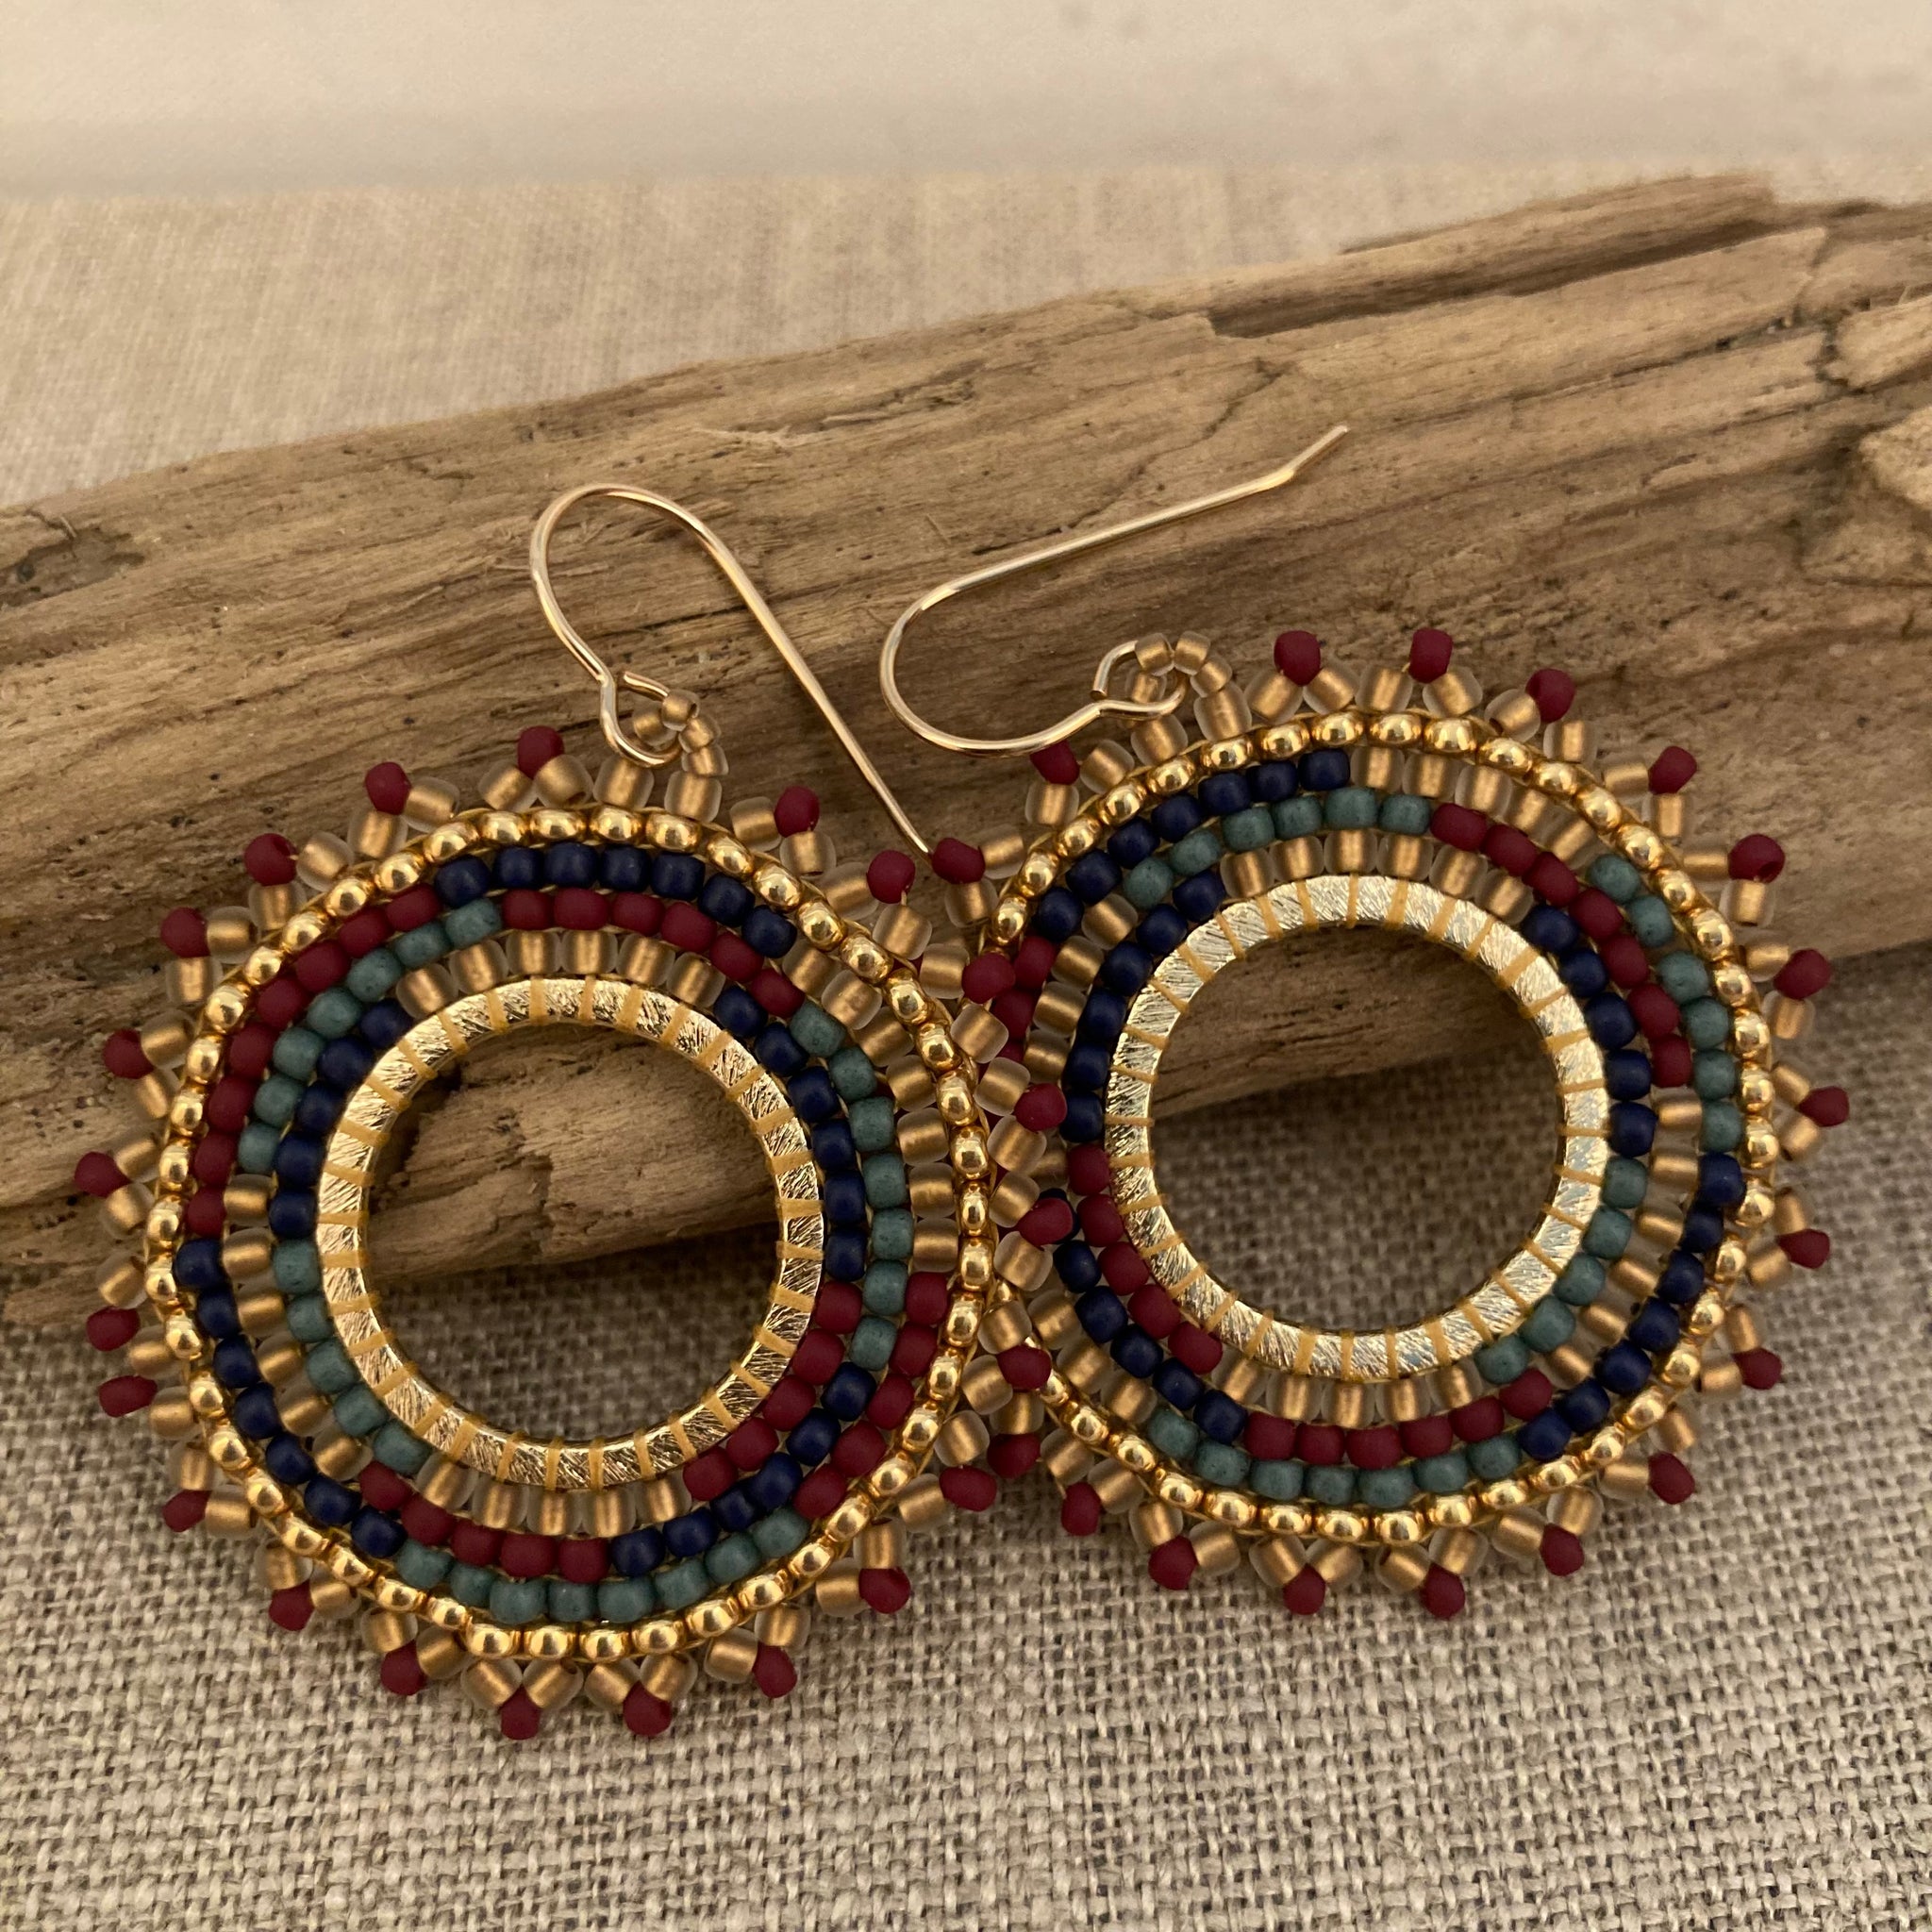 Petite Beaded Hoops in Dark Cranberry Red Navy Gold and Denim Blue